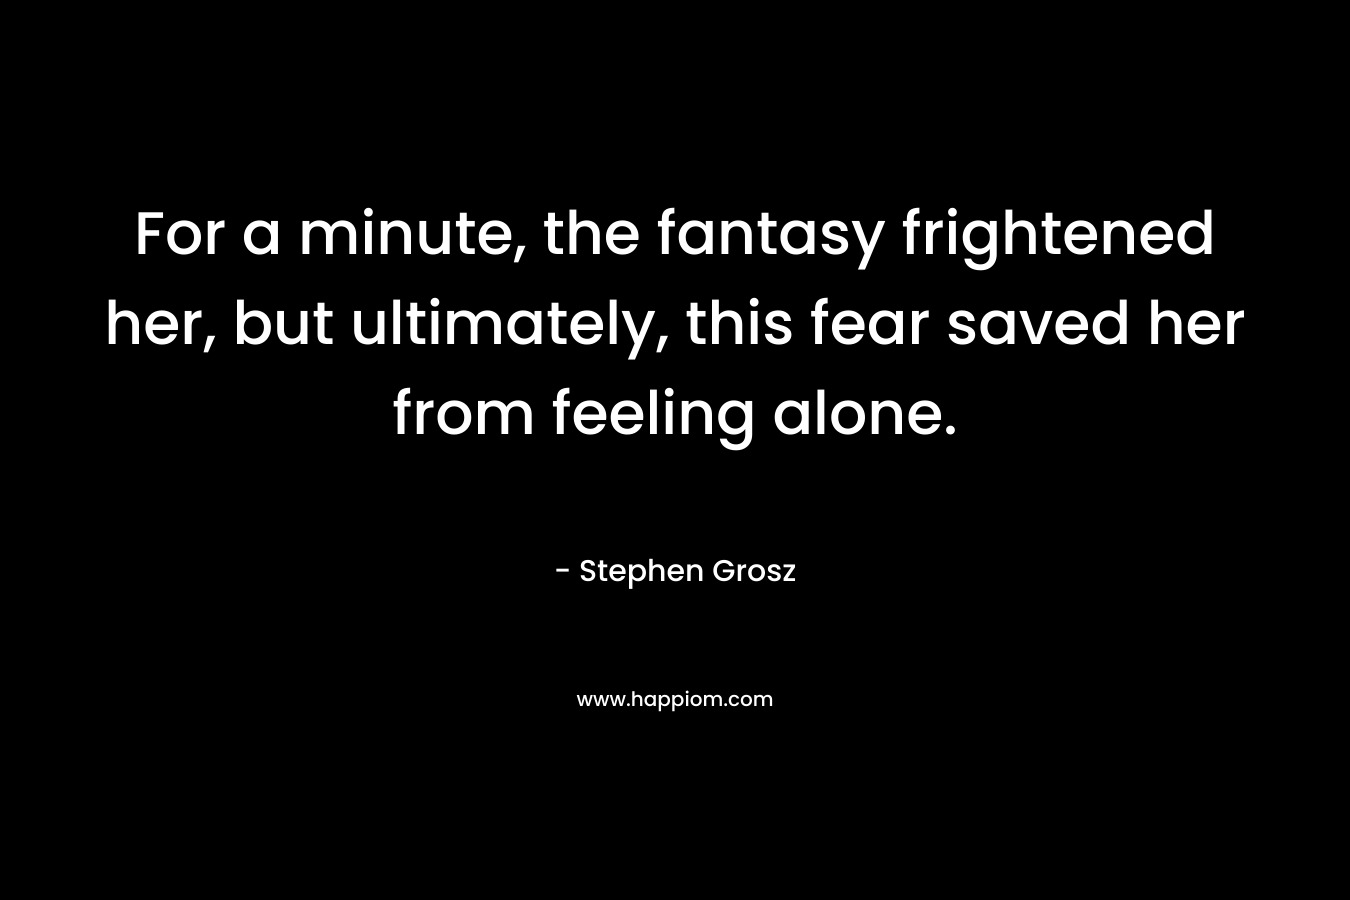 For a minute, the fantasy frightened her, but ultimately, this fear saved her from feeling alone. – Stephen Grosz